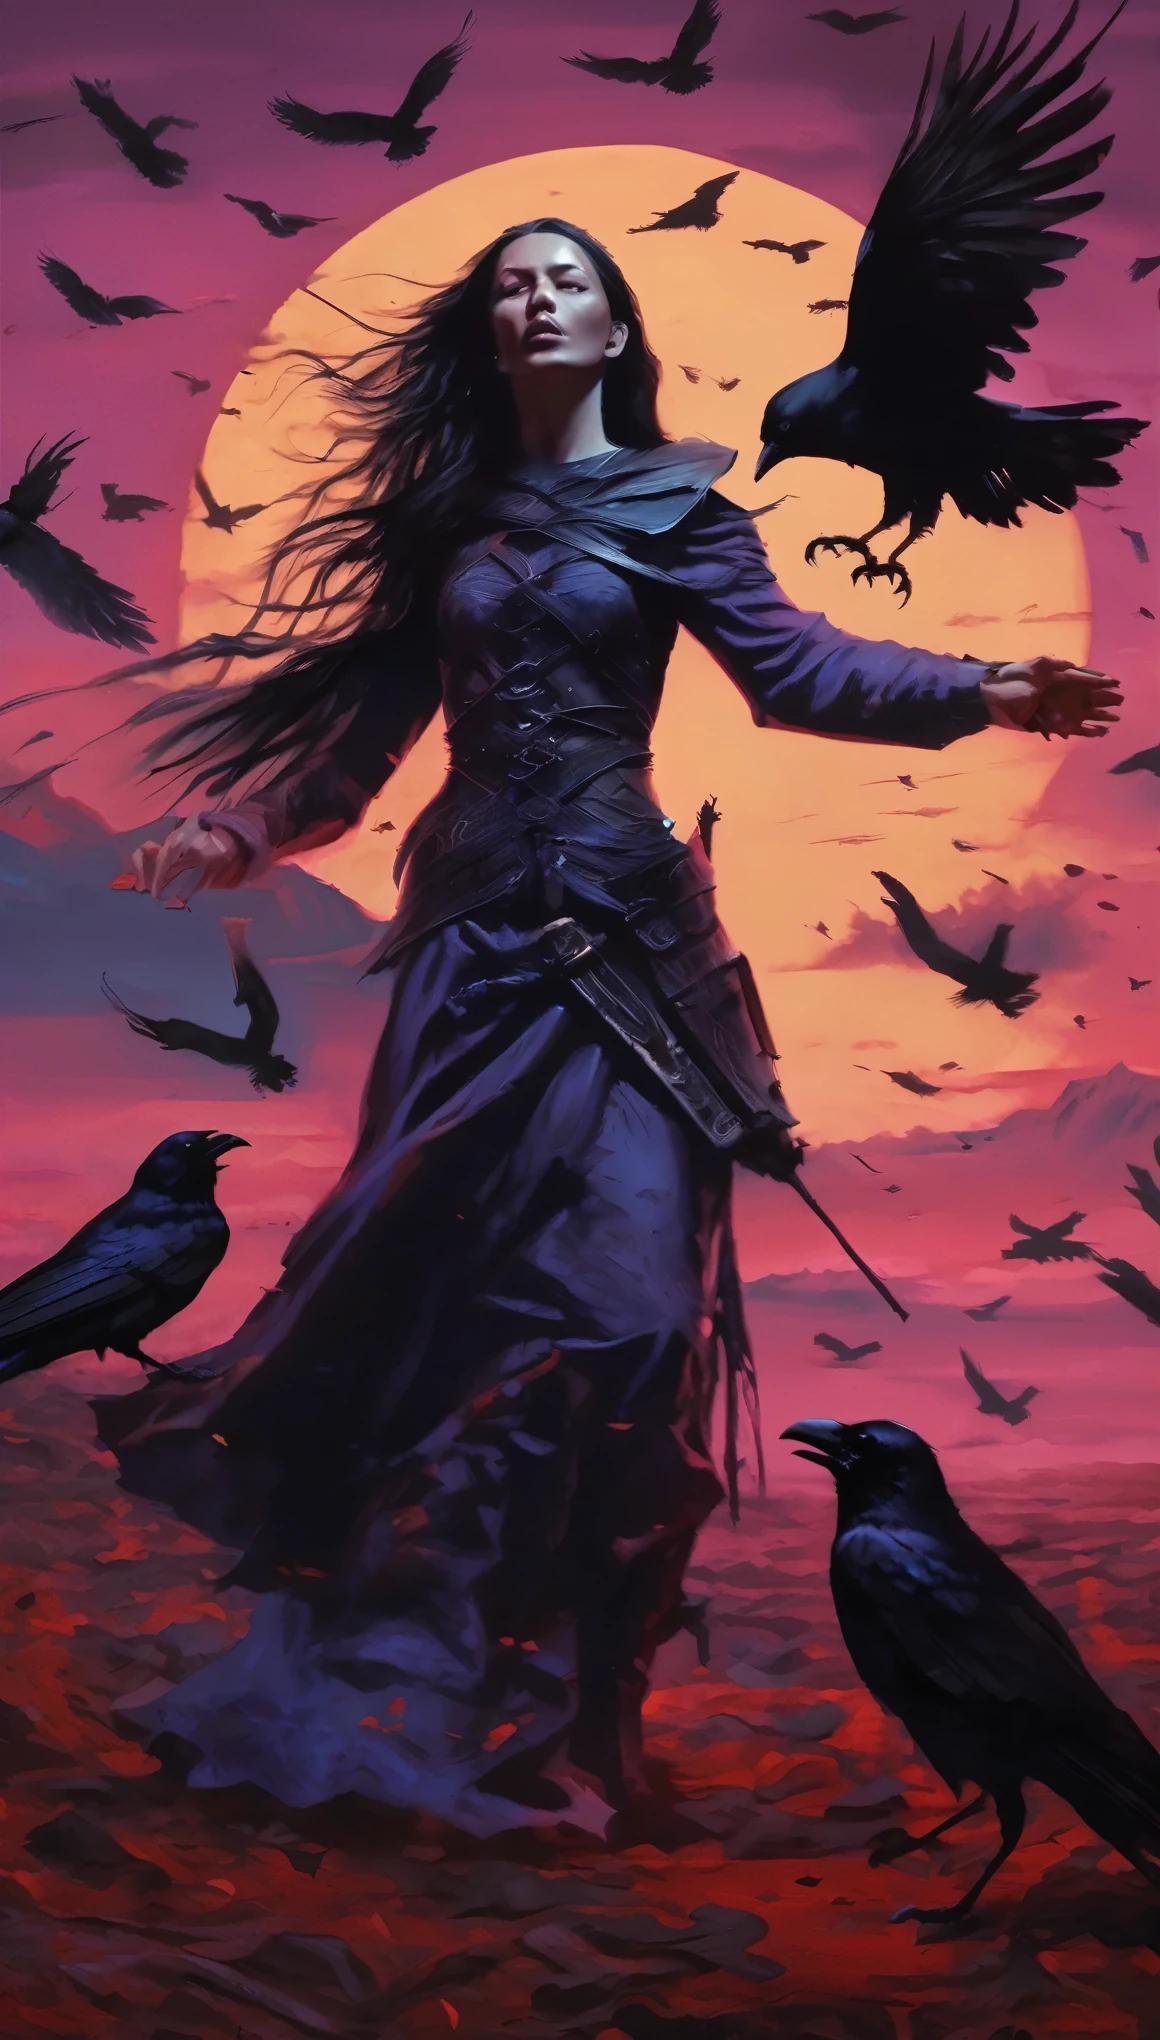 An abstraction of horror in a fantasy world where a woman warrior's body is ripped open by a crow, and the crow emerges from the woman warrior's gut. The horrifying scene is intensified by the woman's terrifying scream of agony.

Medium: Dark and surrealistic illustrations
Additional details: A moonlit sky with eerie shades of purple and blue, twisted trees with gnarled branches, a trail of blood tracing the path of the crow's escape, the warrior's torn armor scattered on the ground.
Image quality: (best quality, 4k, highres, masterpiece:1.2), ultra-detailed, (realistic, photorealistic, photo-realistic:1.37)
Art style: Horror, surrealism
Color palette: Dark and gloomy colors with stark contrasts
Lighting: Soft moonlight casting eerie shadows, with a faint glow surrounding the crow.